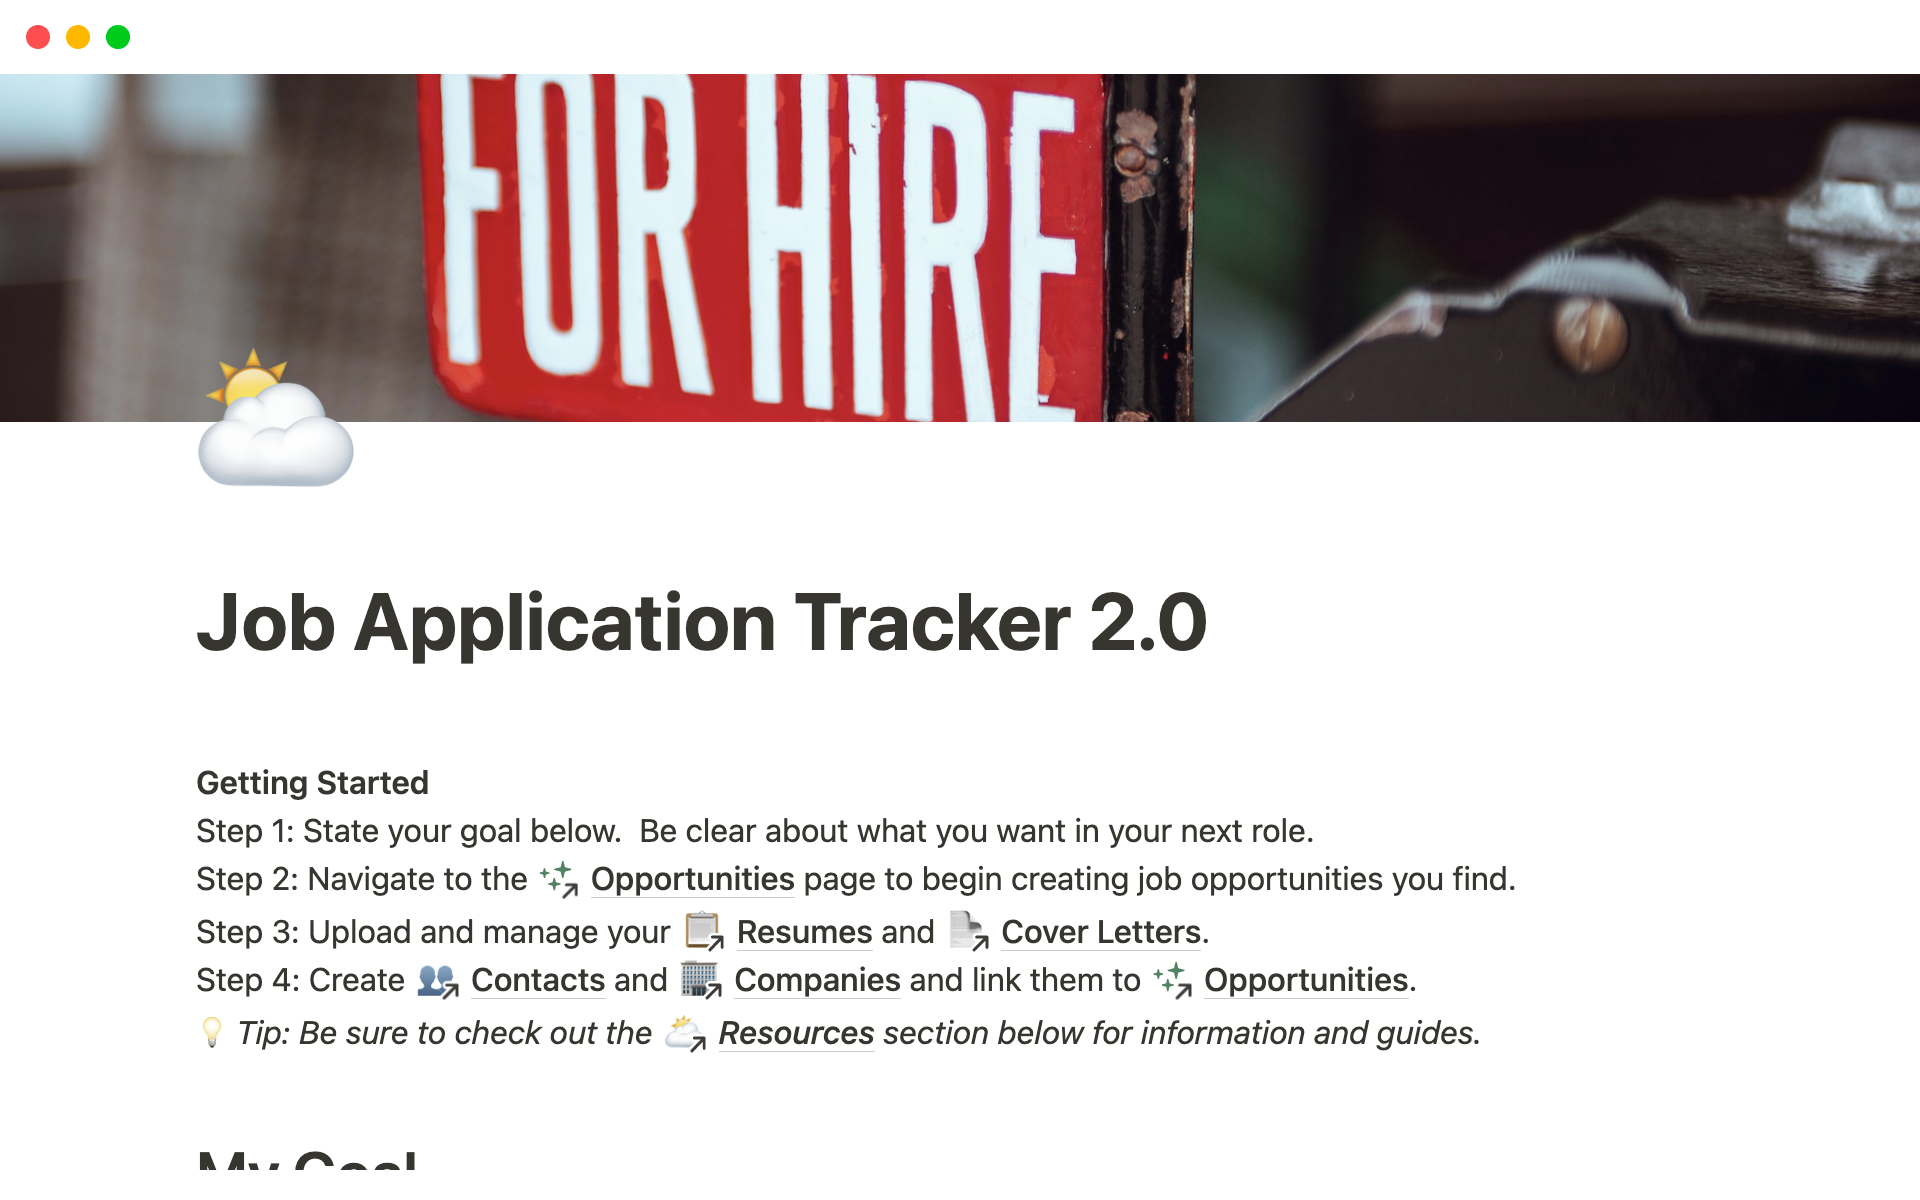 A complete job application tracker to help you land your next role!